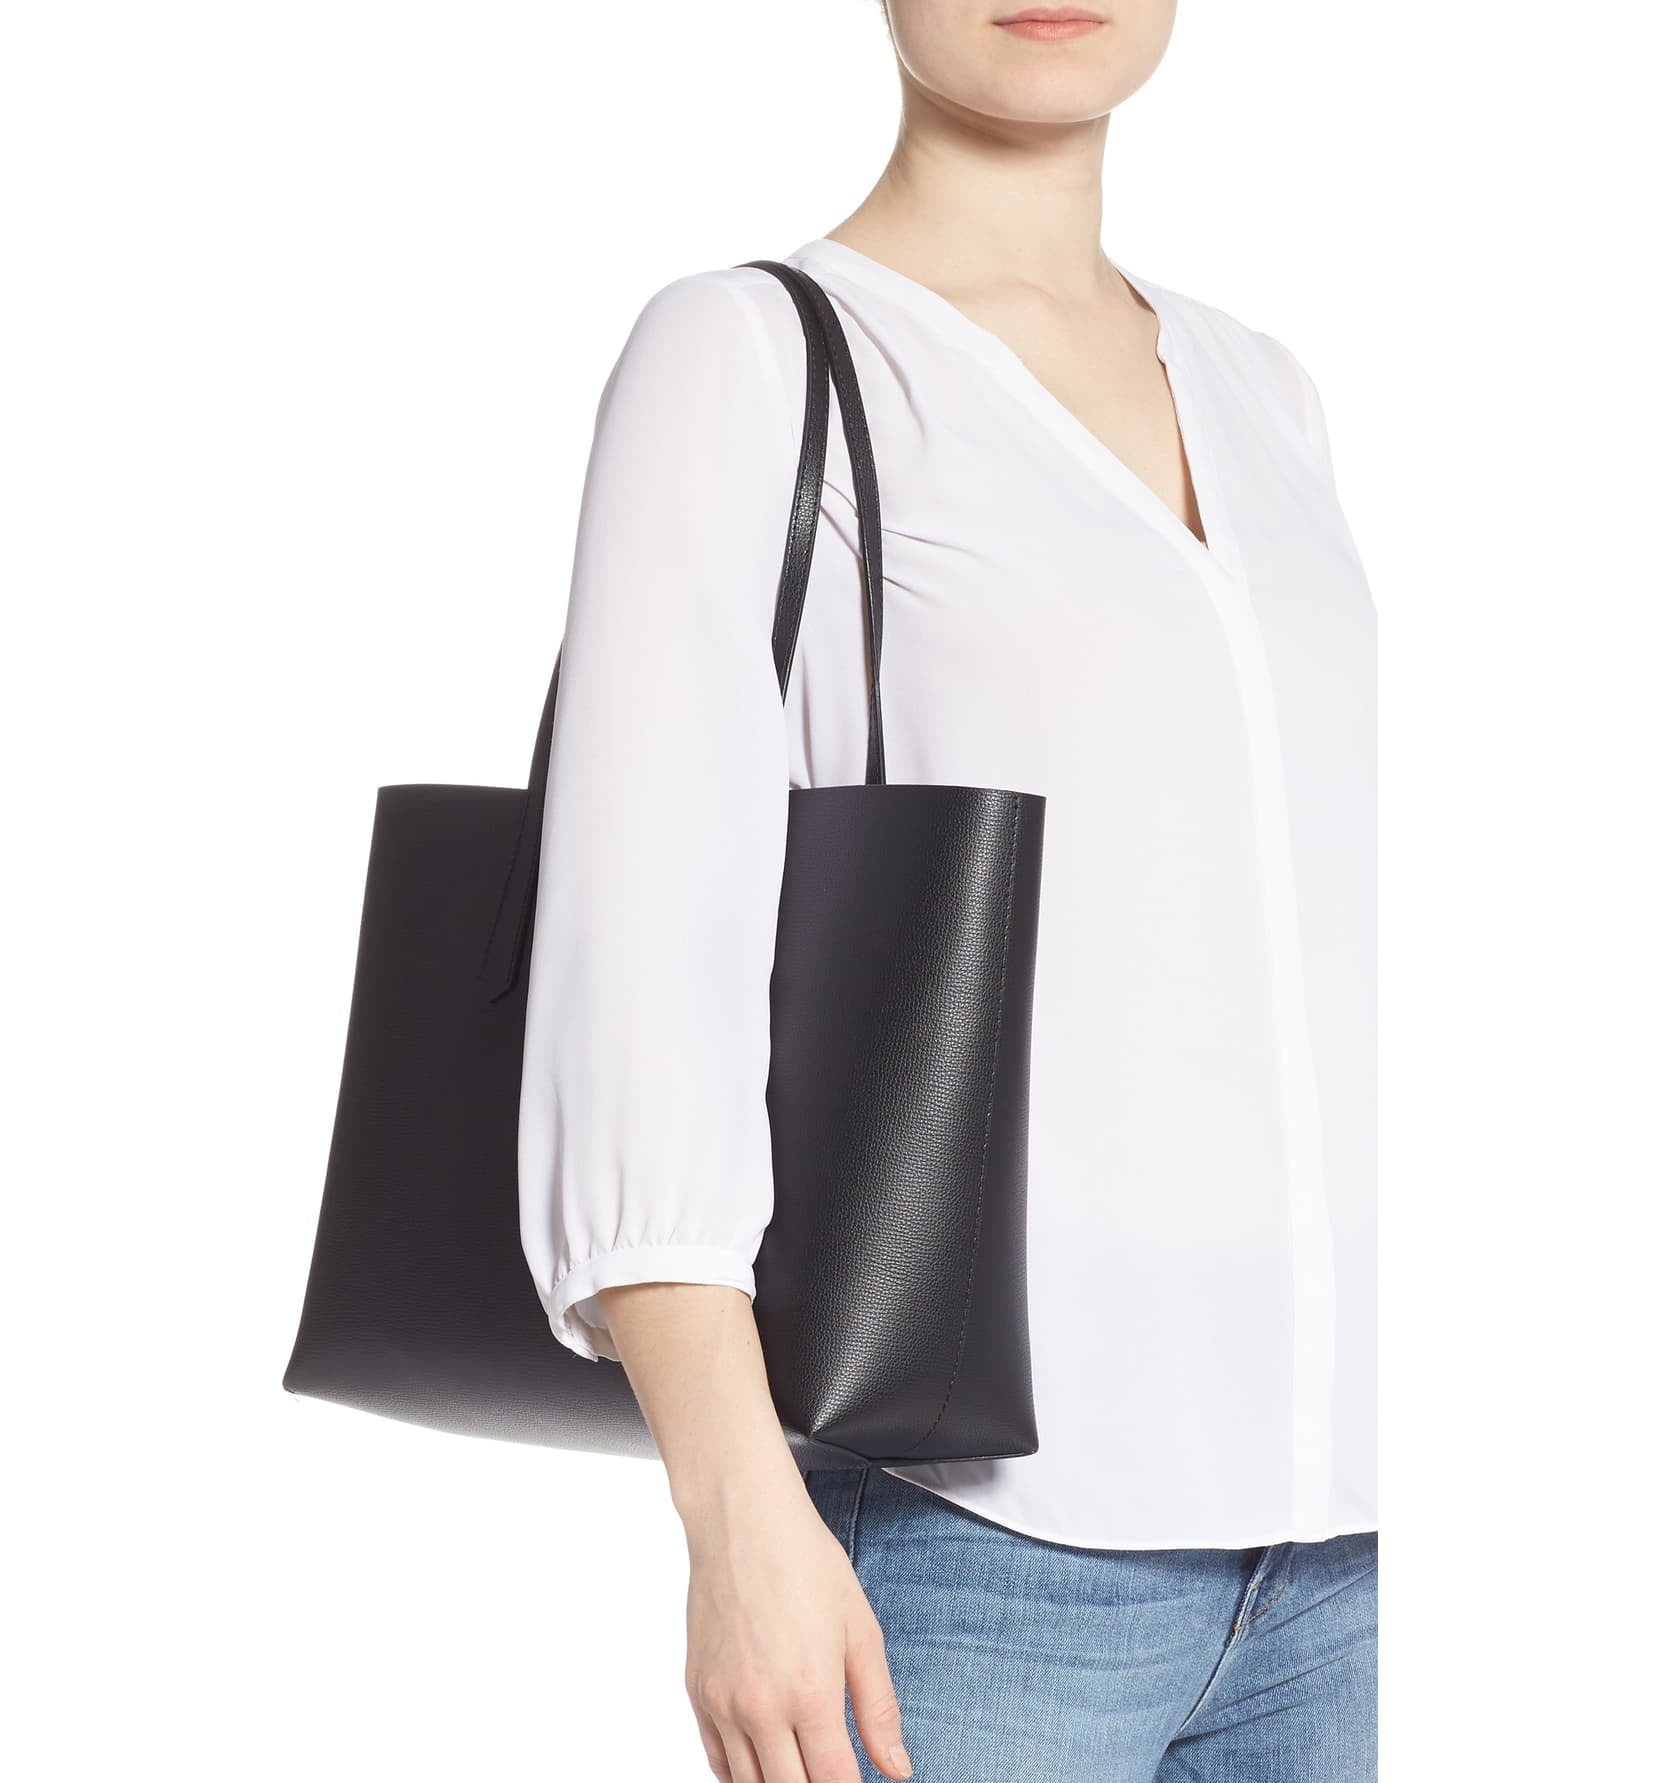 Cuyana Black Classic Structured Leather Tote - Meghan Markle's Handbags -  Meghan's Fashion